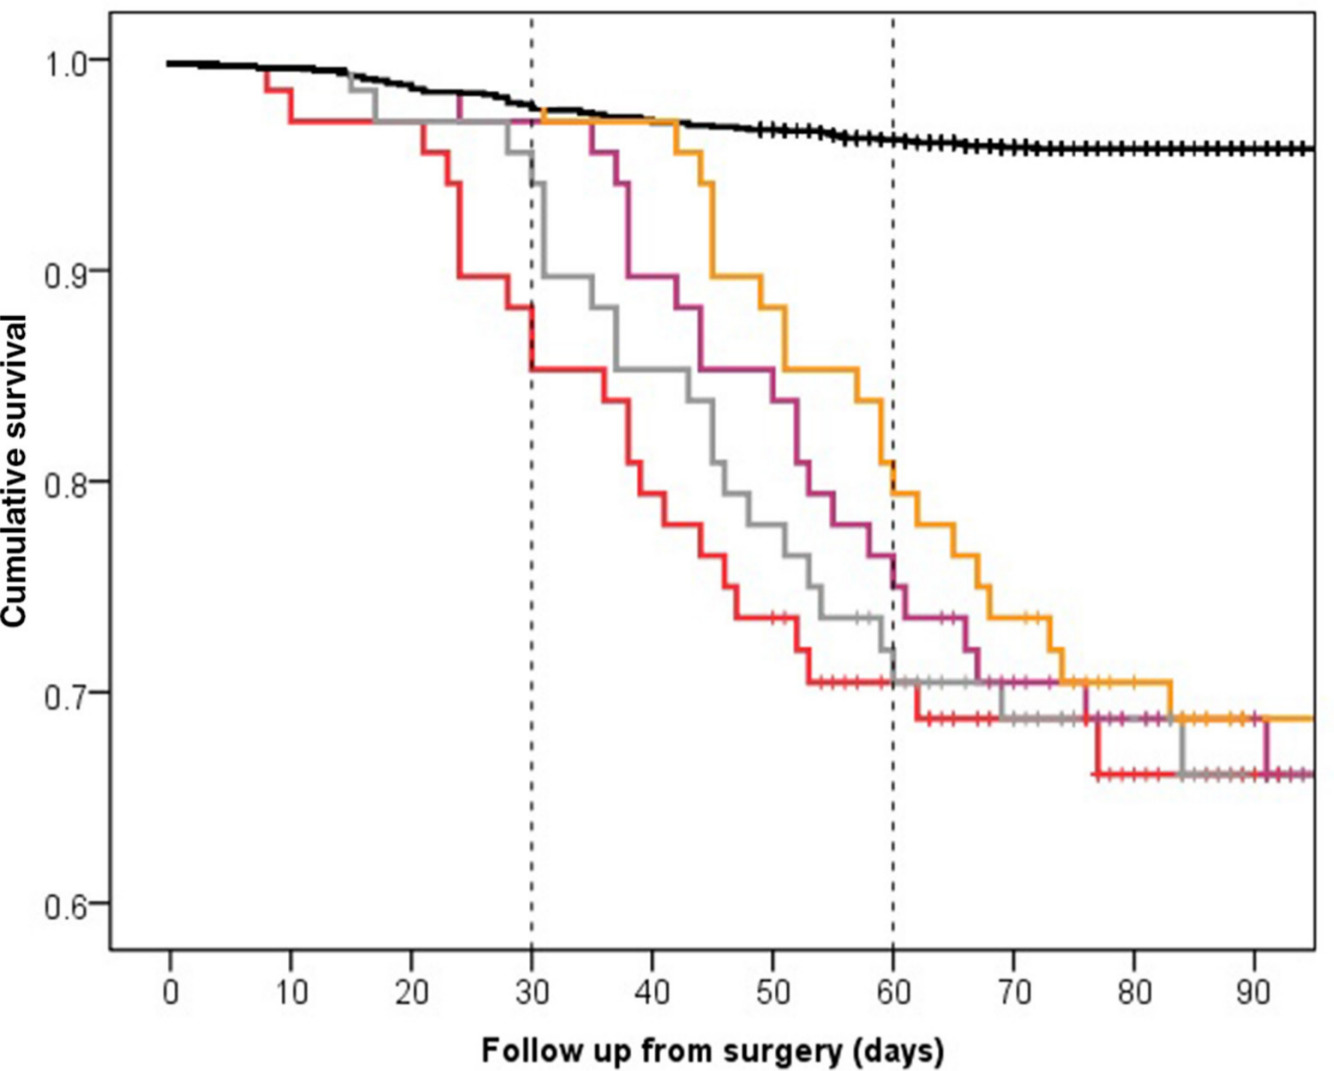 Fig. 7 
          Kaplan–Meier survival curves for patients with (n=68, red line) and without (n=1501, black line) perioperative coronavirus disease 2019 (COVID-19) perioperatively, using data from Clement et al.7 The grey, purple, and orange lines indicate hypothesized seven, 14, and 21 day delays in time of acquiring COVID-19, respectively. This graph shows the effect on the rate of 30- and 60-day mortality rates, with an approximate variation of 10% in cumulative survival rates.
        